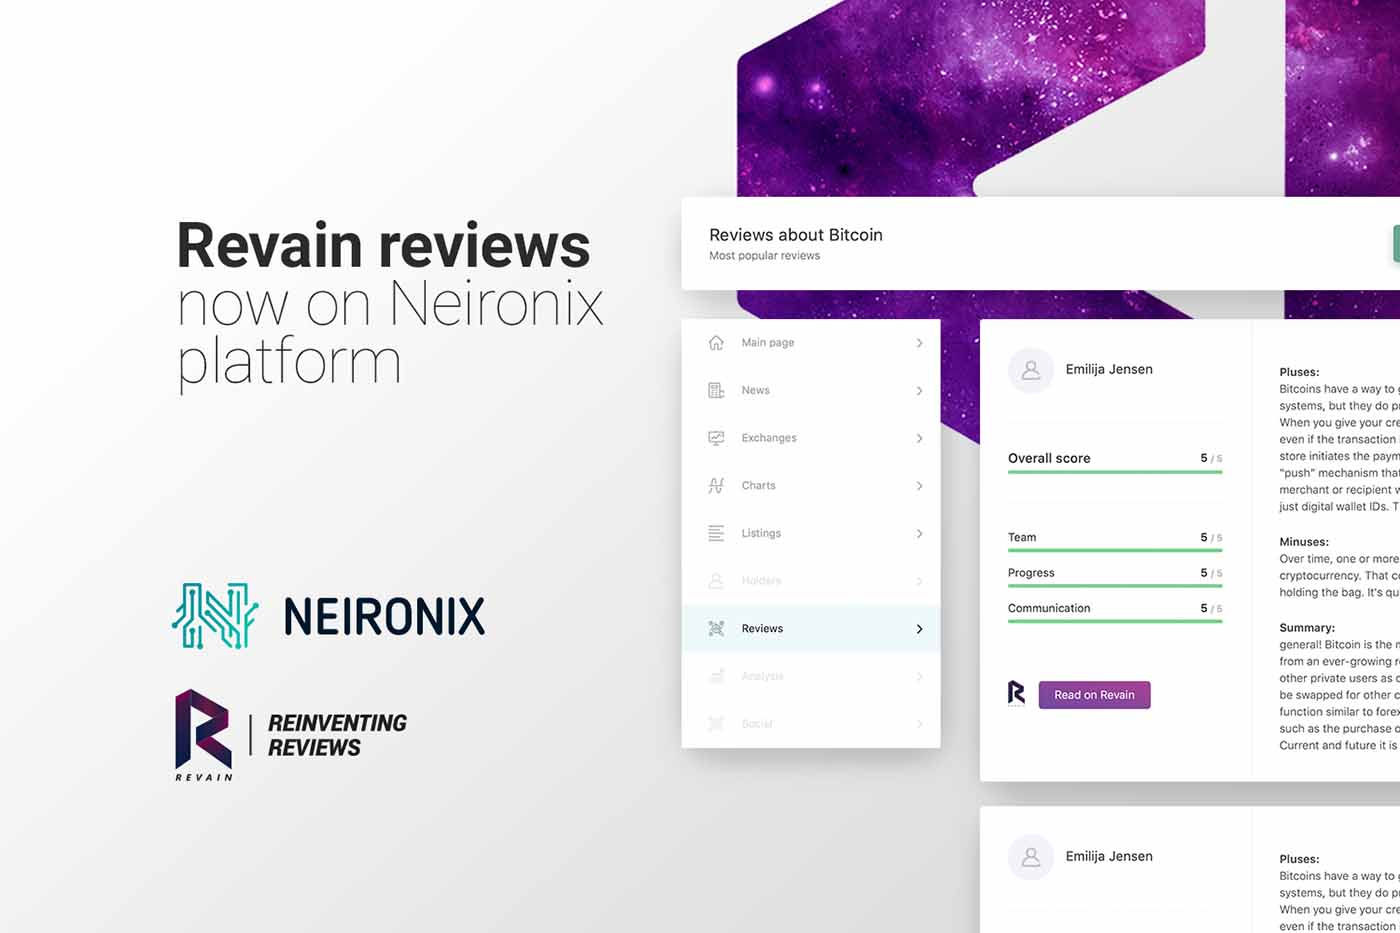 Article Neironix platform integrated Revain reviews as part of a mutual partnership